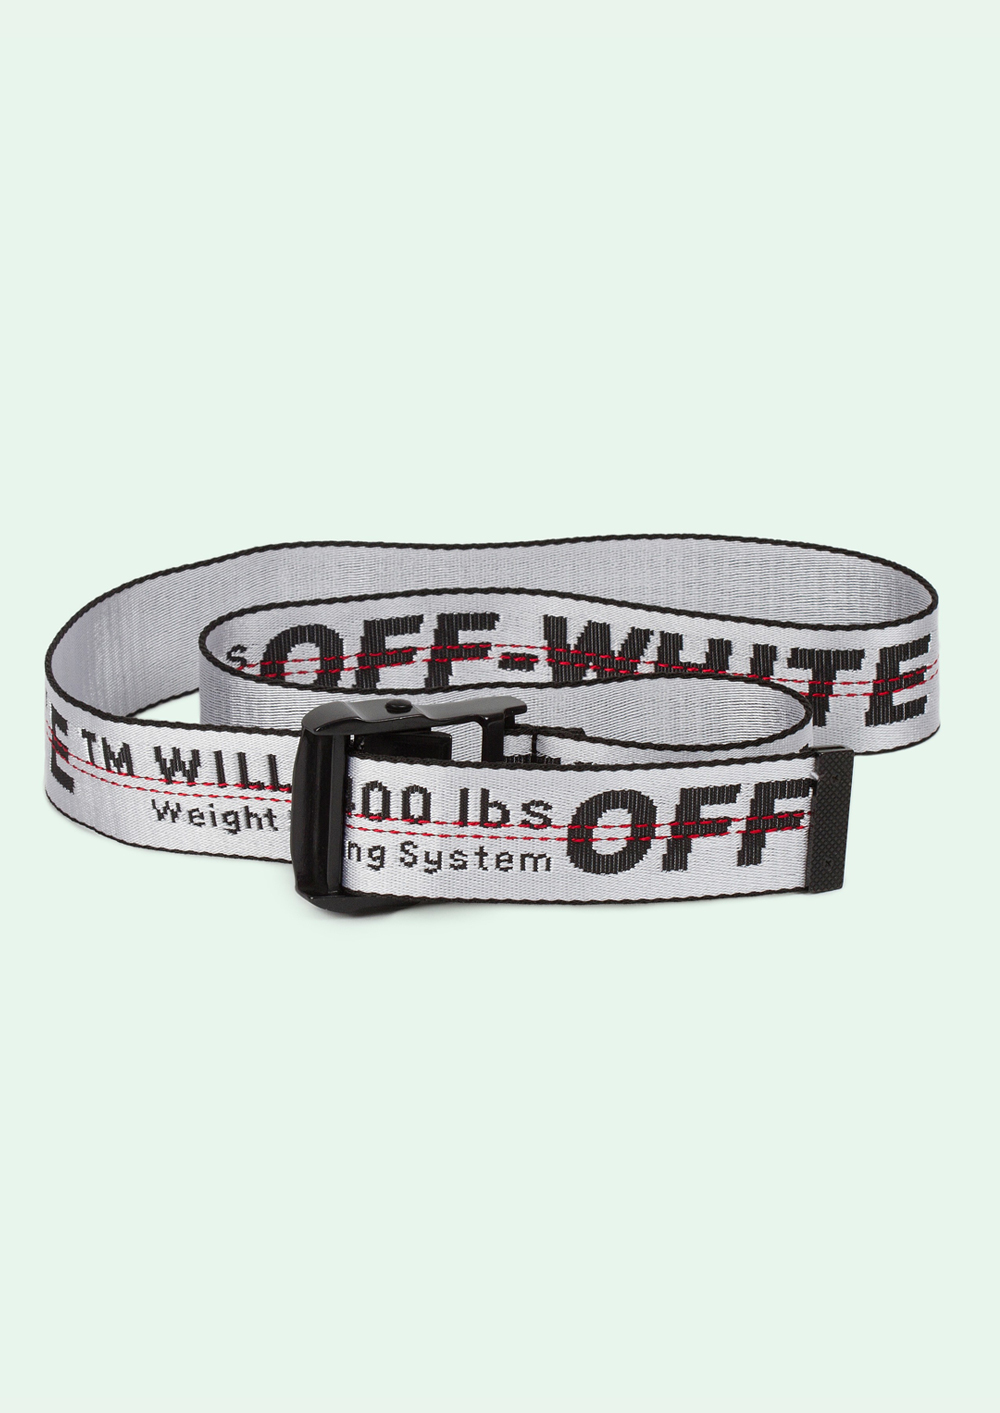 The “Industrial Belt” OFF-WHITE Is Now Available In White Online | Fashion, Street Style, Fashion News & Streetwear